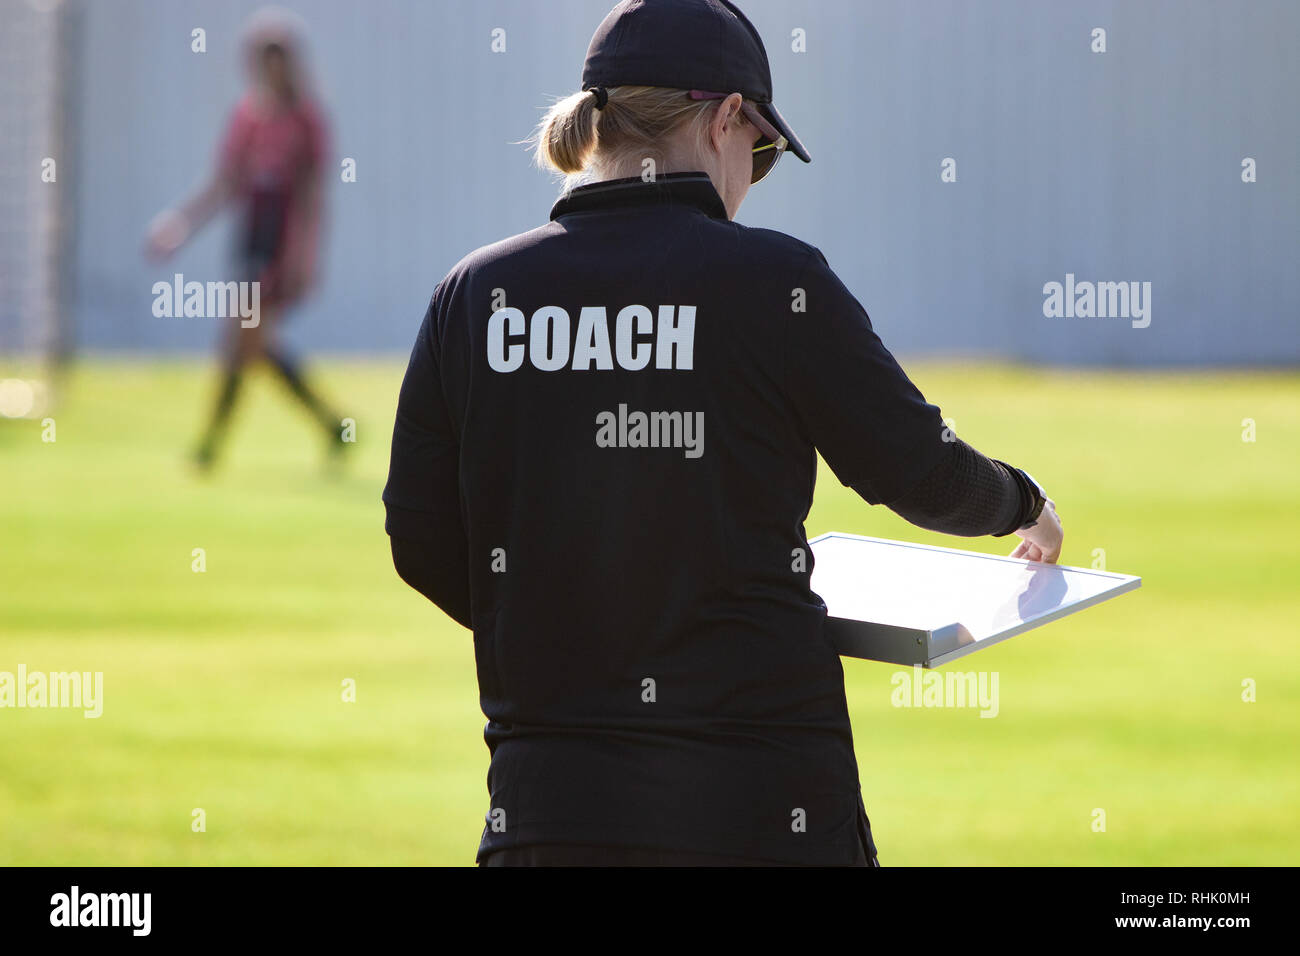 Back view of female sport coach in black COACH shirt at an outdoor sport field, looking at her game plan chart, good for sport or coaching concept Stock Photo